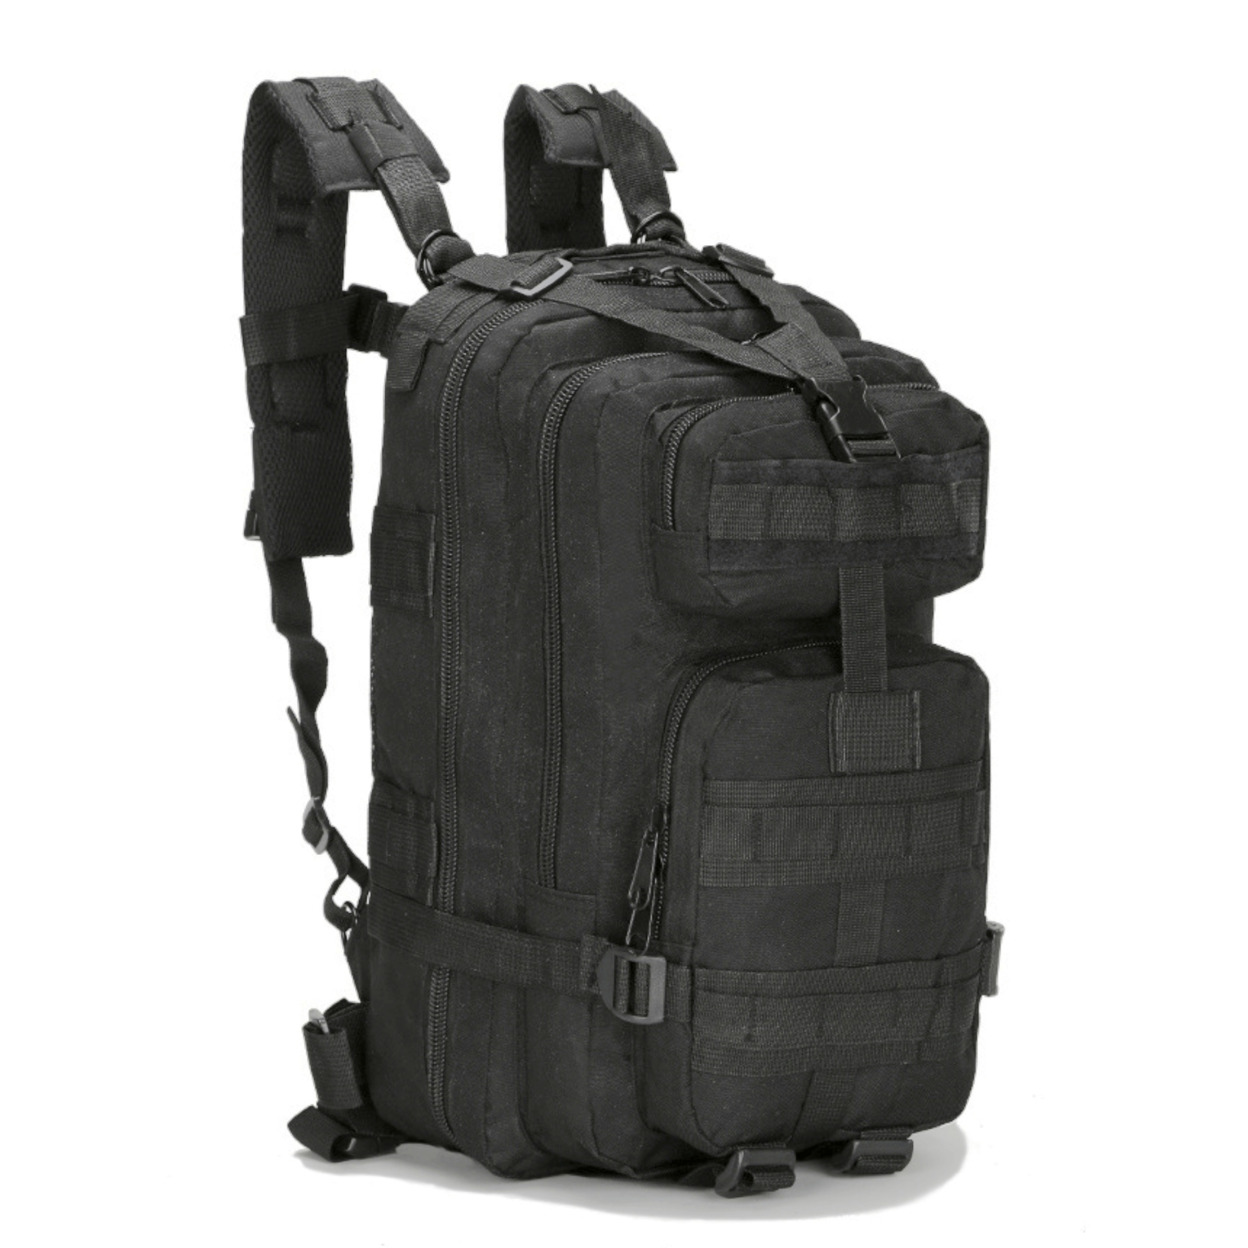 Tactical 25L Molle Backpack - Army Green